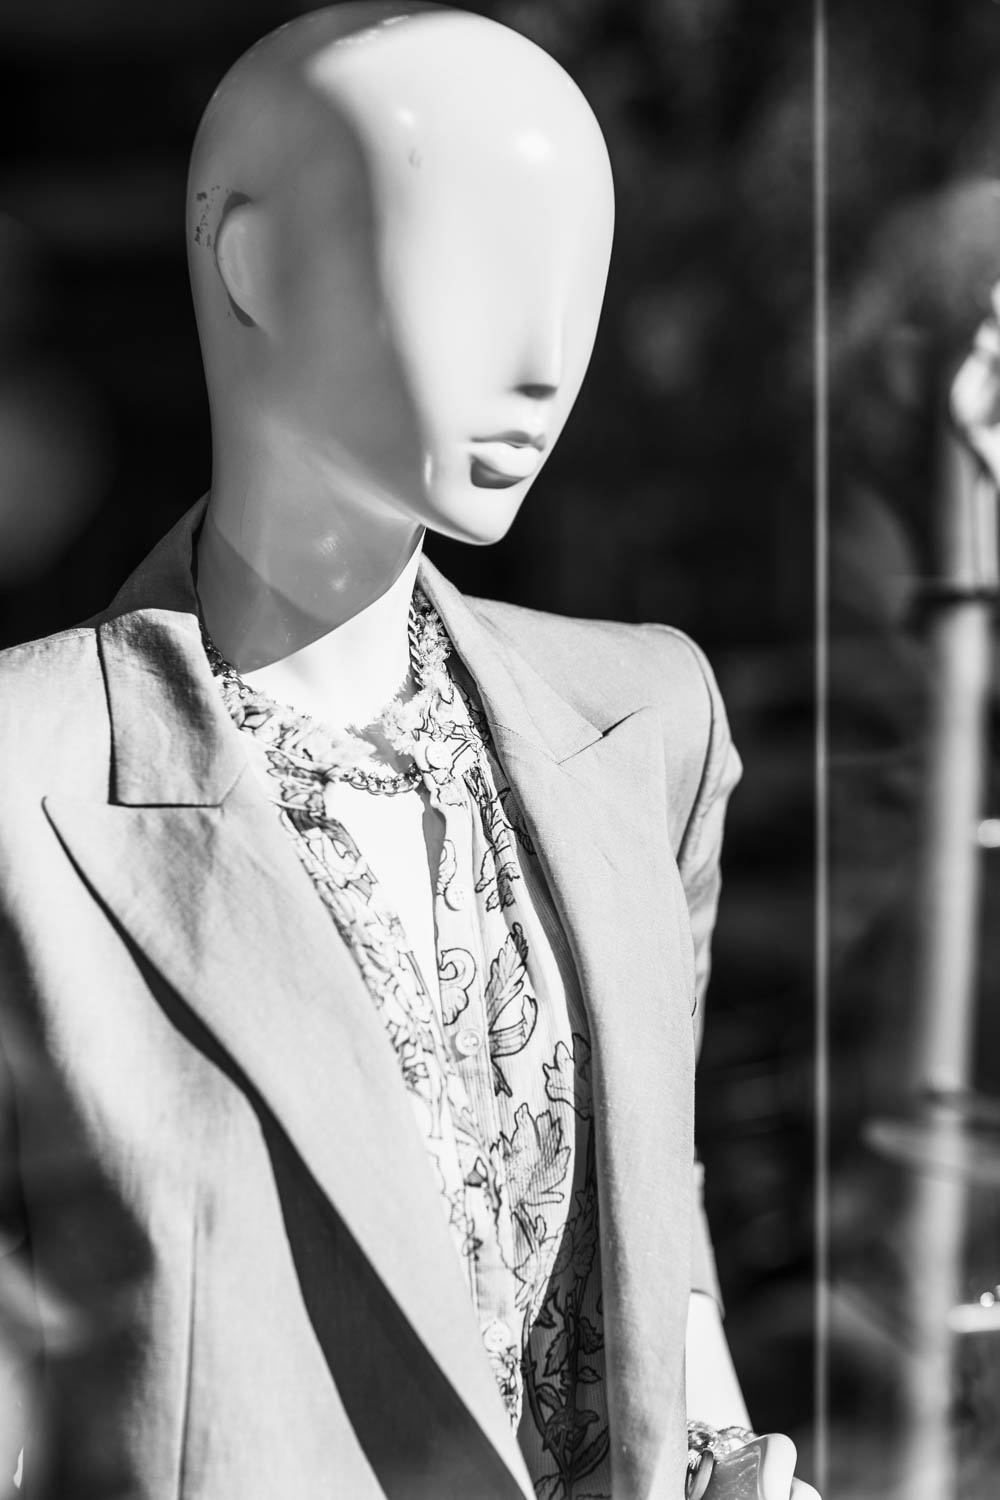 Blazer on shop mannequin at the Calexico Boutique on James Street.